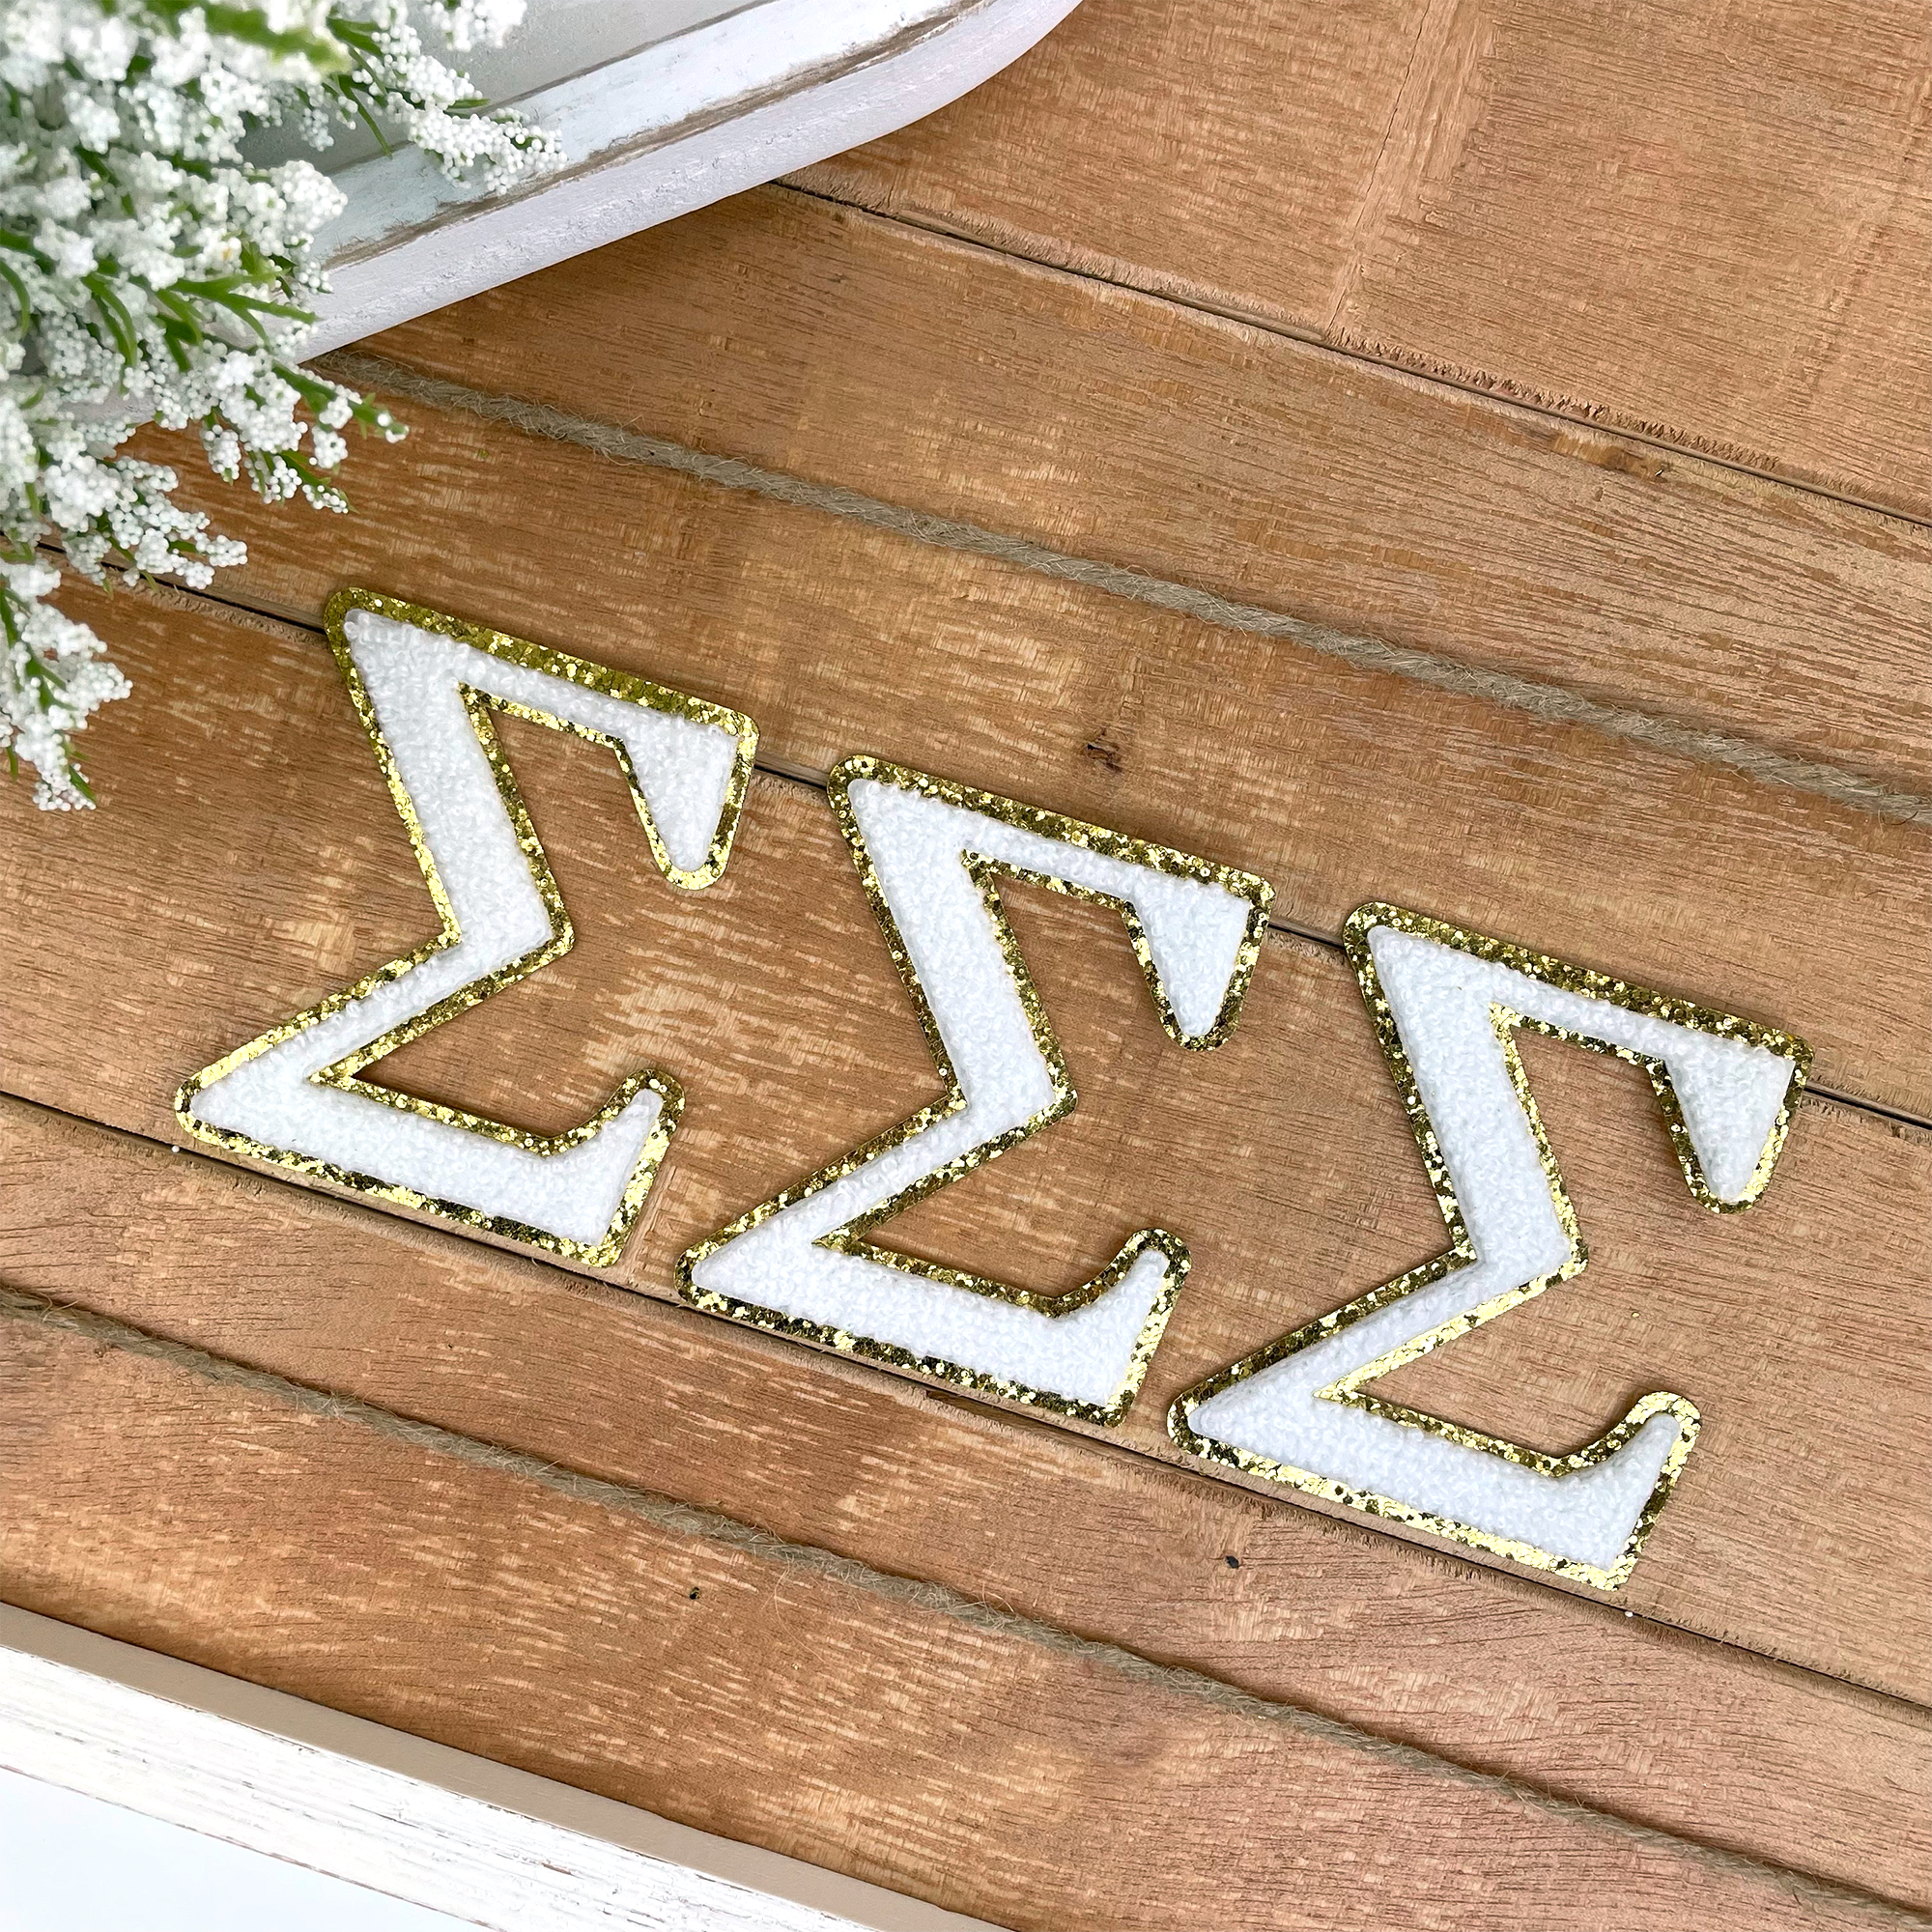 Sigma Sigma Sigma Iron-On Chenille Letter Patch Set - Go Greek Chic